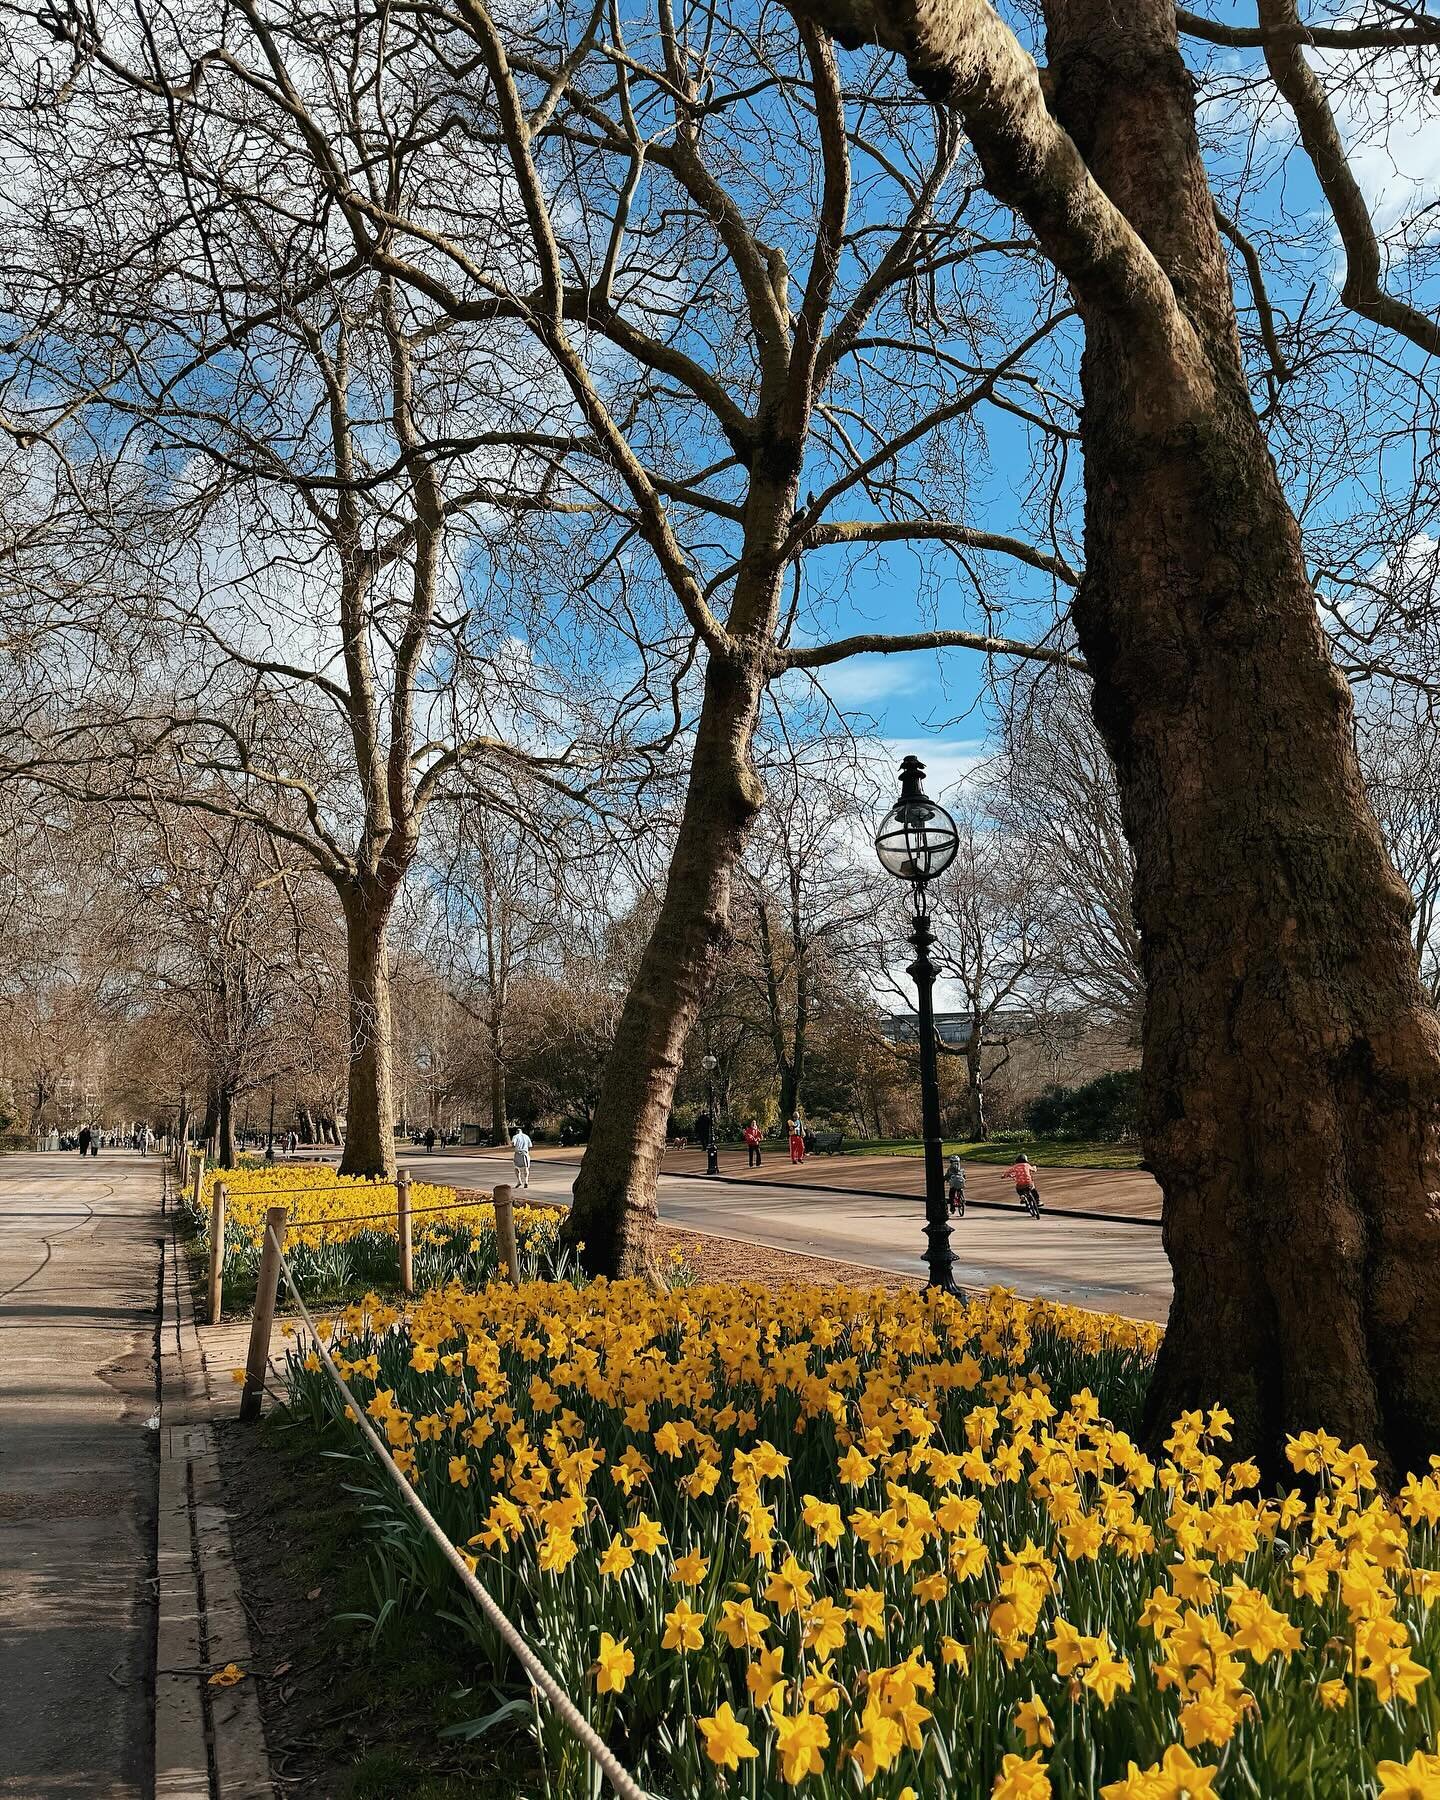 Hyde Park in full bloom yesterday 🌼 (only a daisy was harmed in the making of this content 😅)